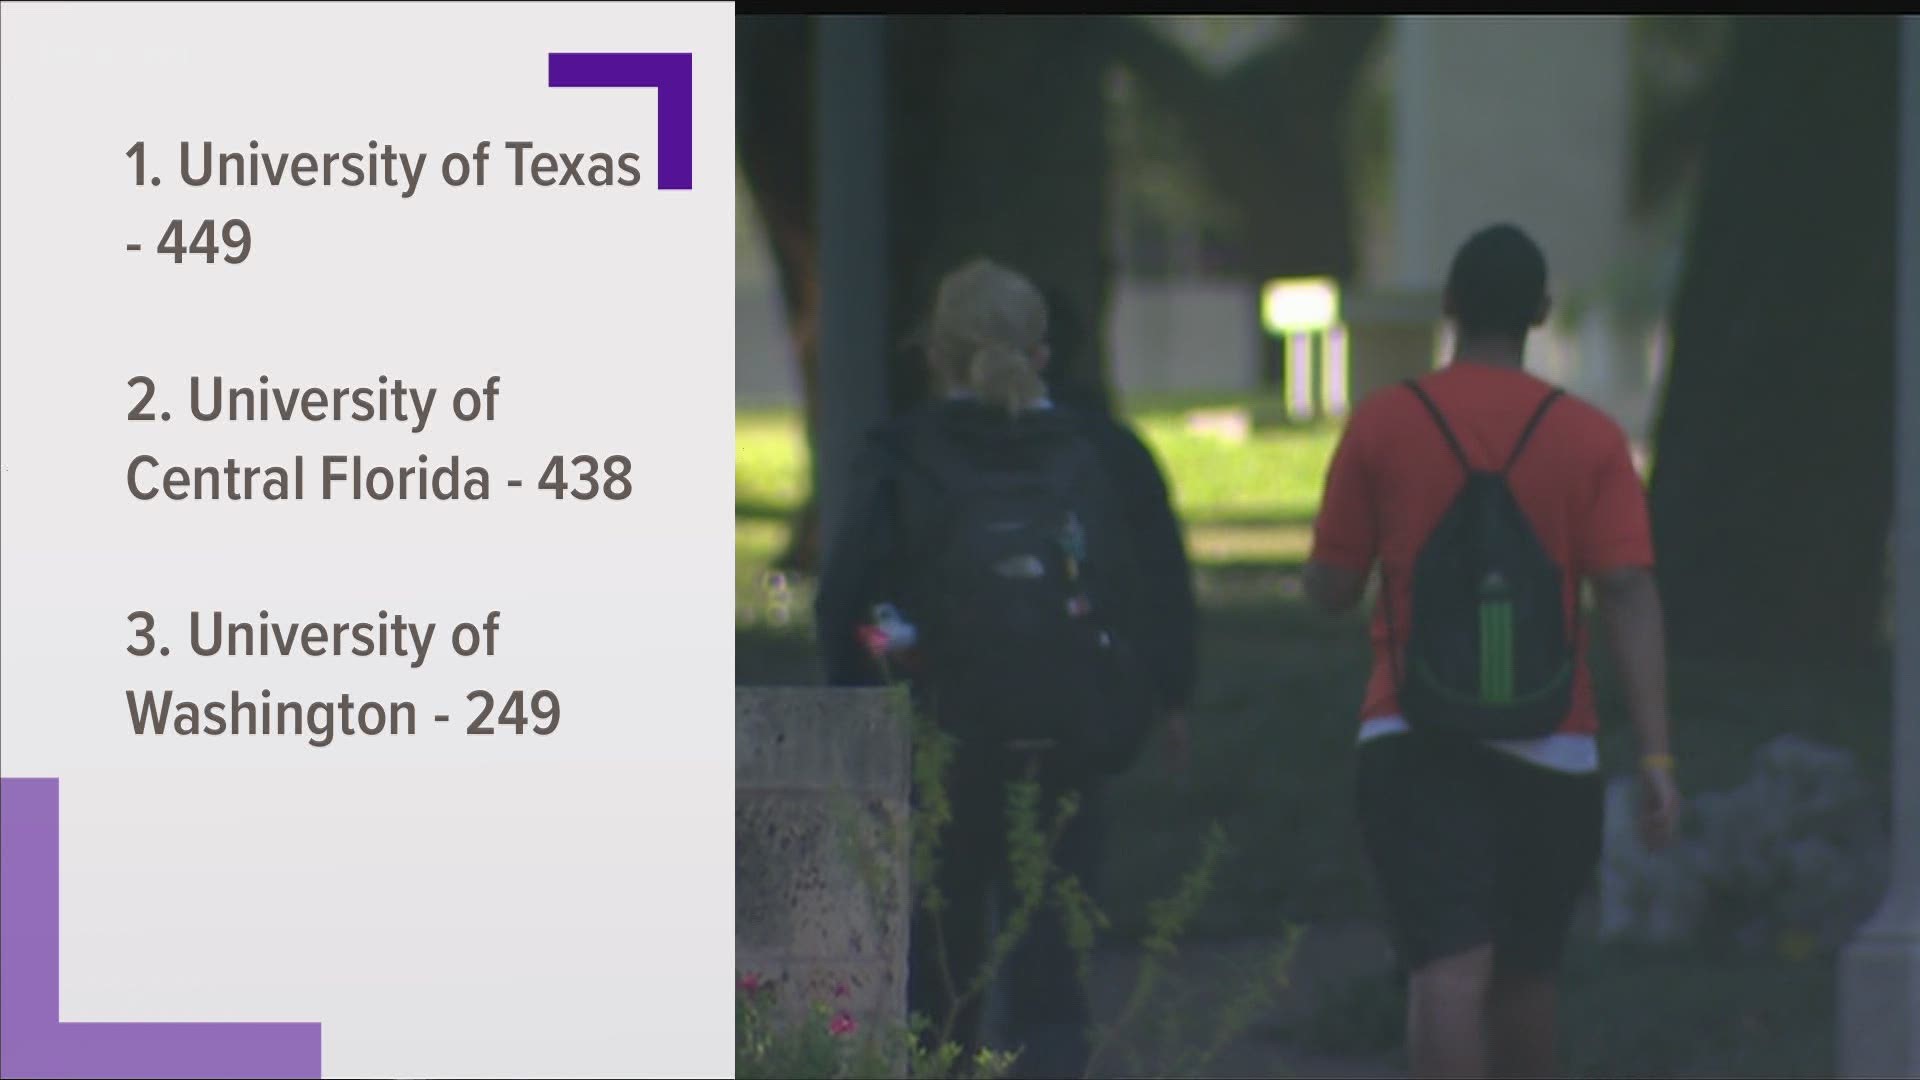 On Wednesday, a new report showed UT has had more COVID-19 cases reported than any other university in the U.S.